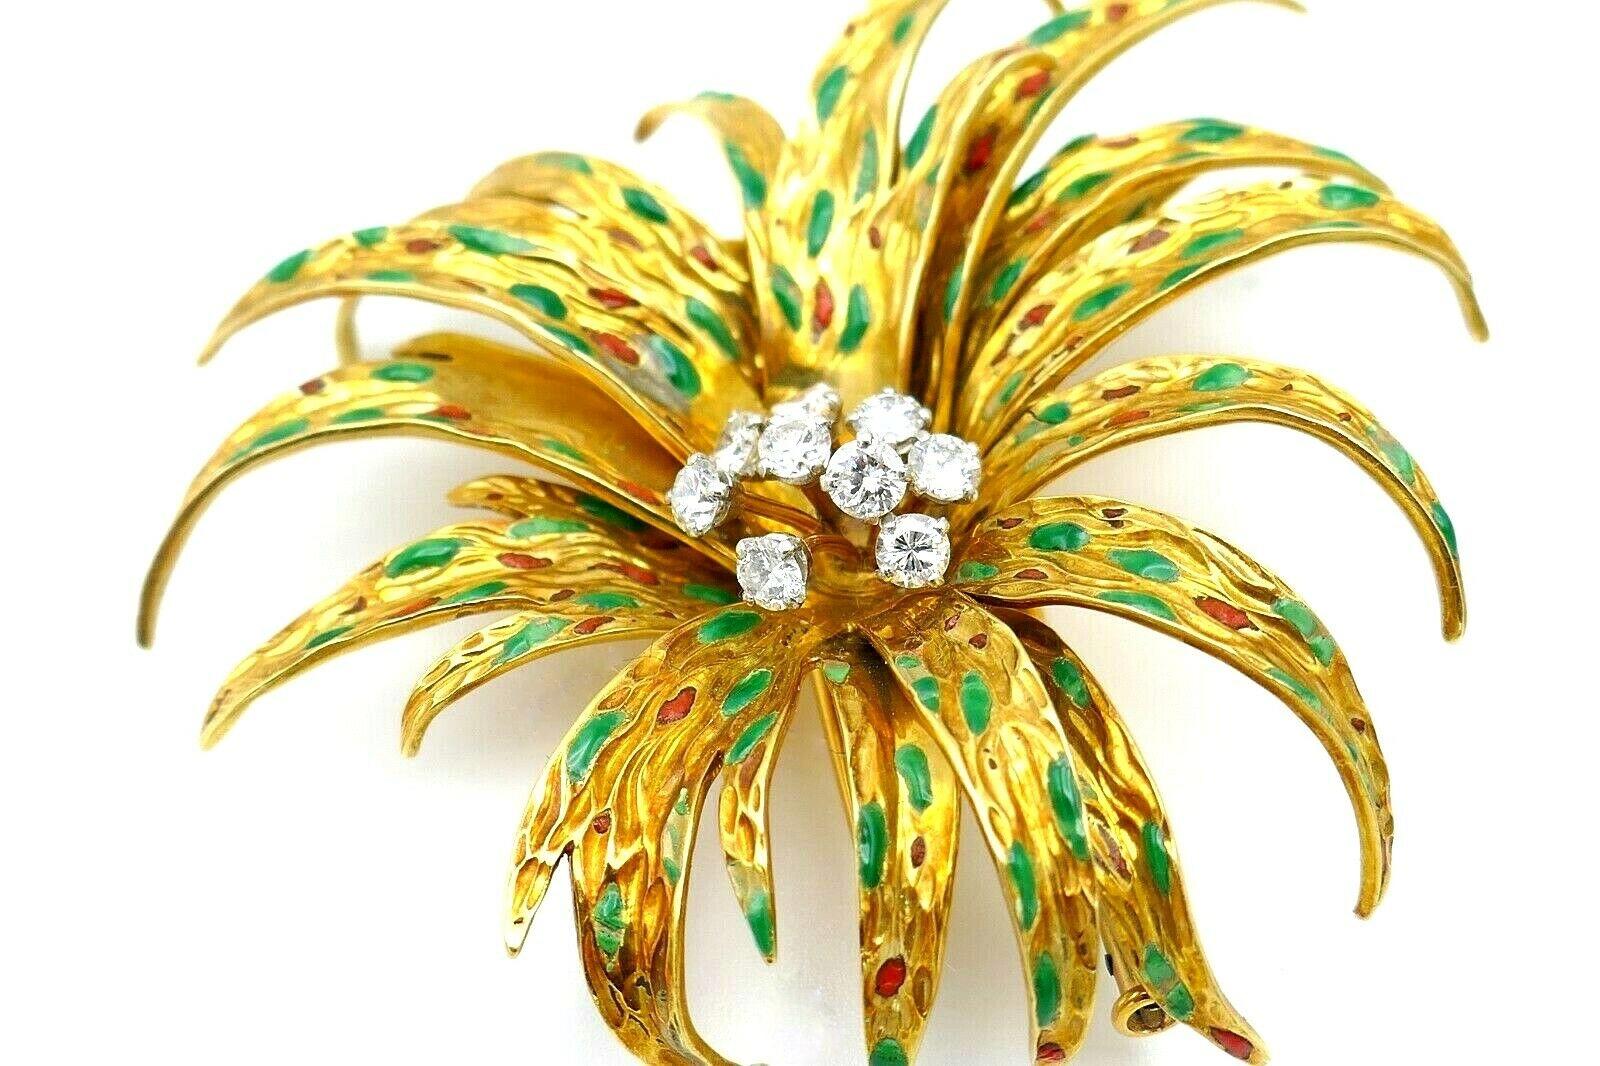 Gorgeous vintage flower brooch made of 18k yellow gold by Boucheron (Paris). Featuring diamond and enamel accents.  Diamonds are round brilliant cut, total weight is 0.90 points. 
Stamped with Boucheron maker's mark, a hallmark for 18k gold and a